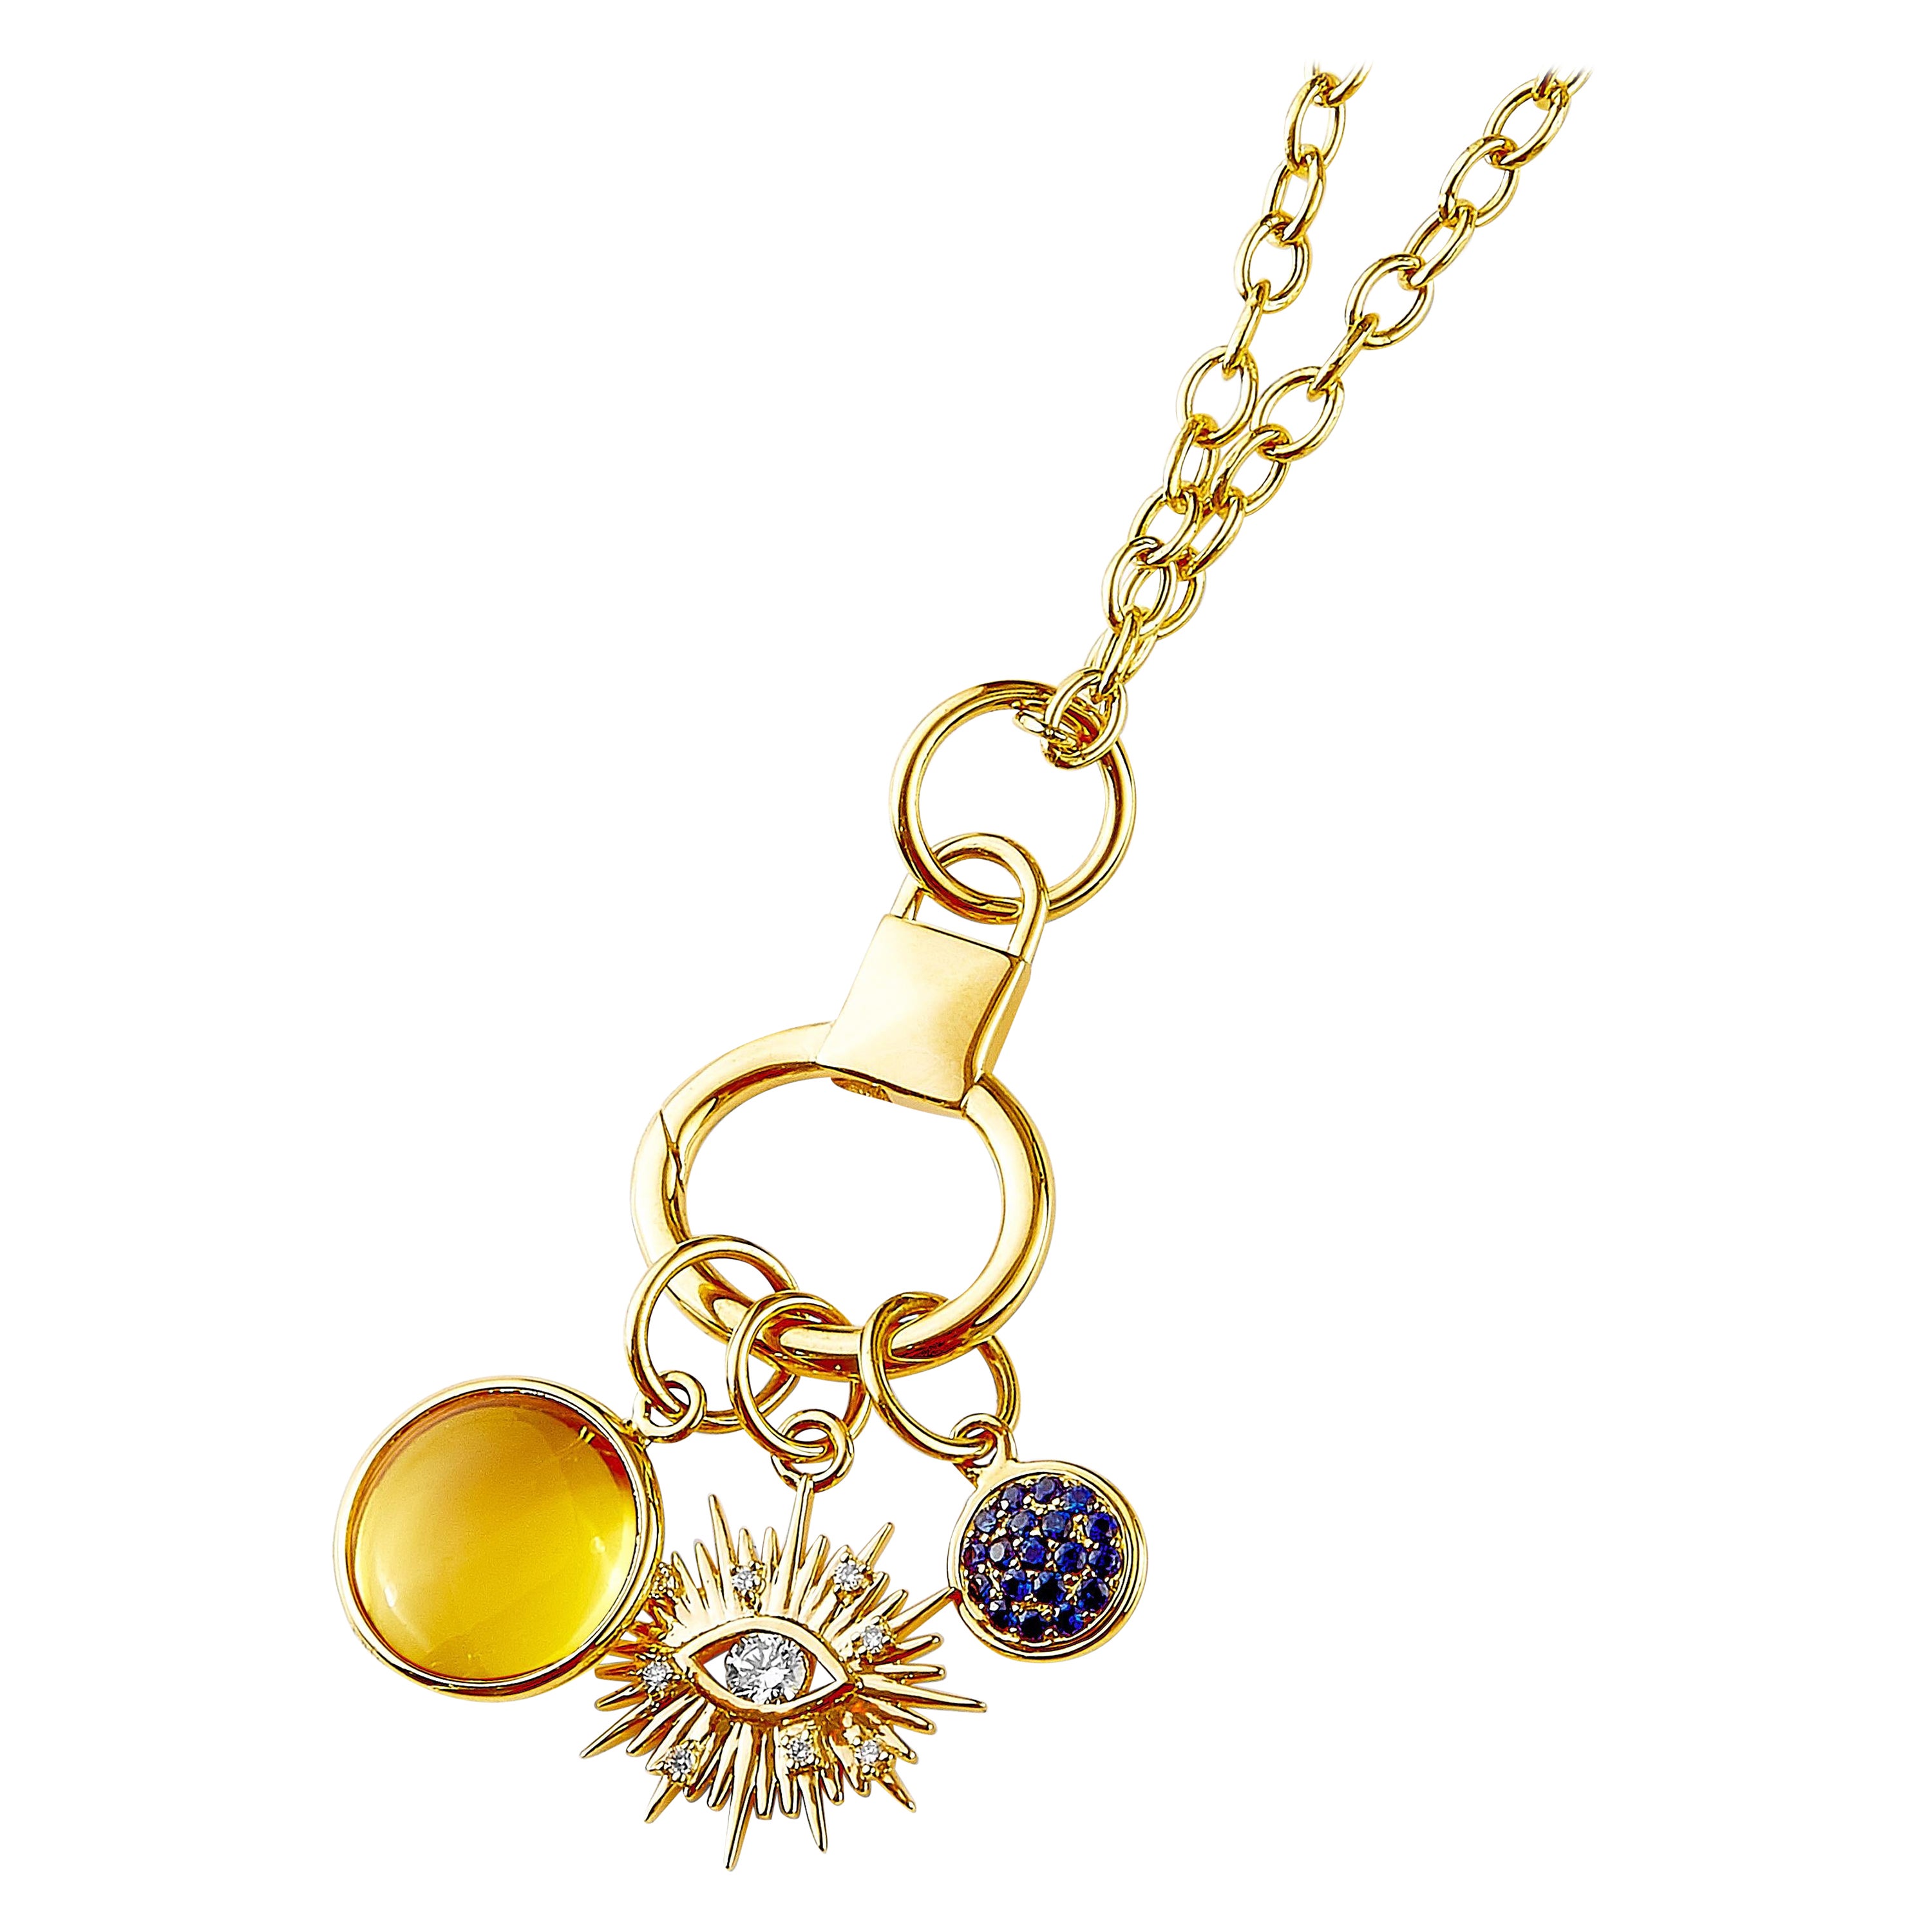 Syna Yellow Gold Three Charms Evil Eye Necklace with Gemstones and Diamonds